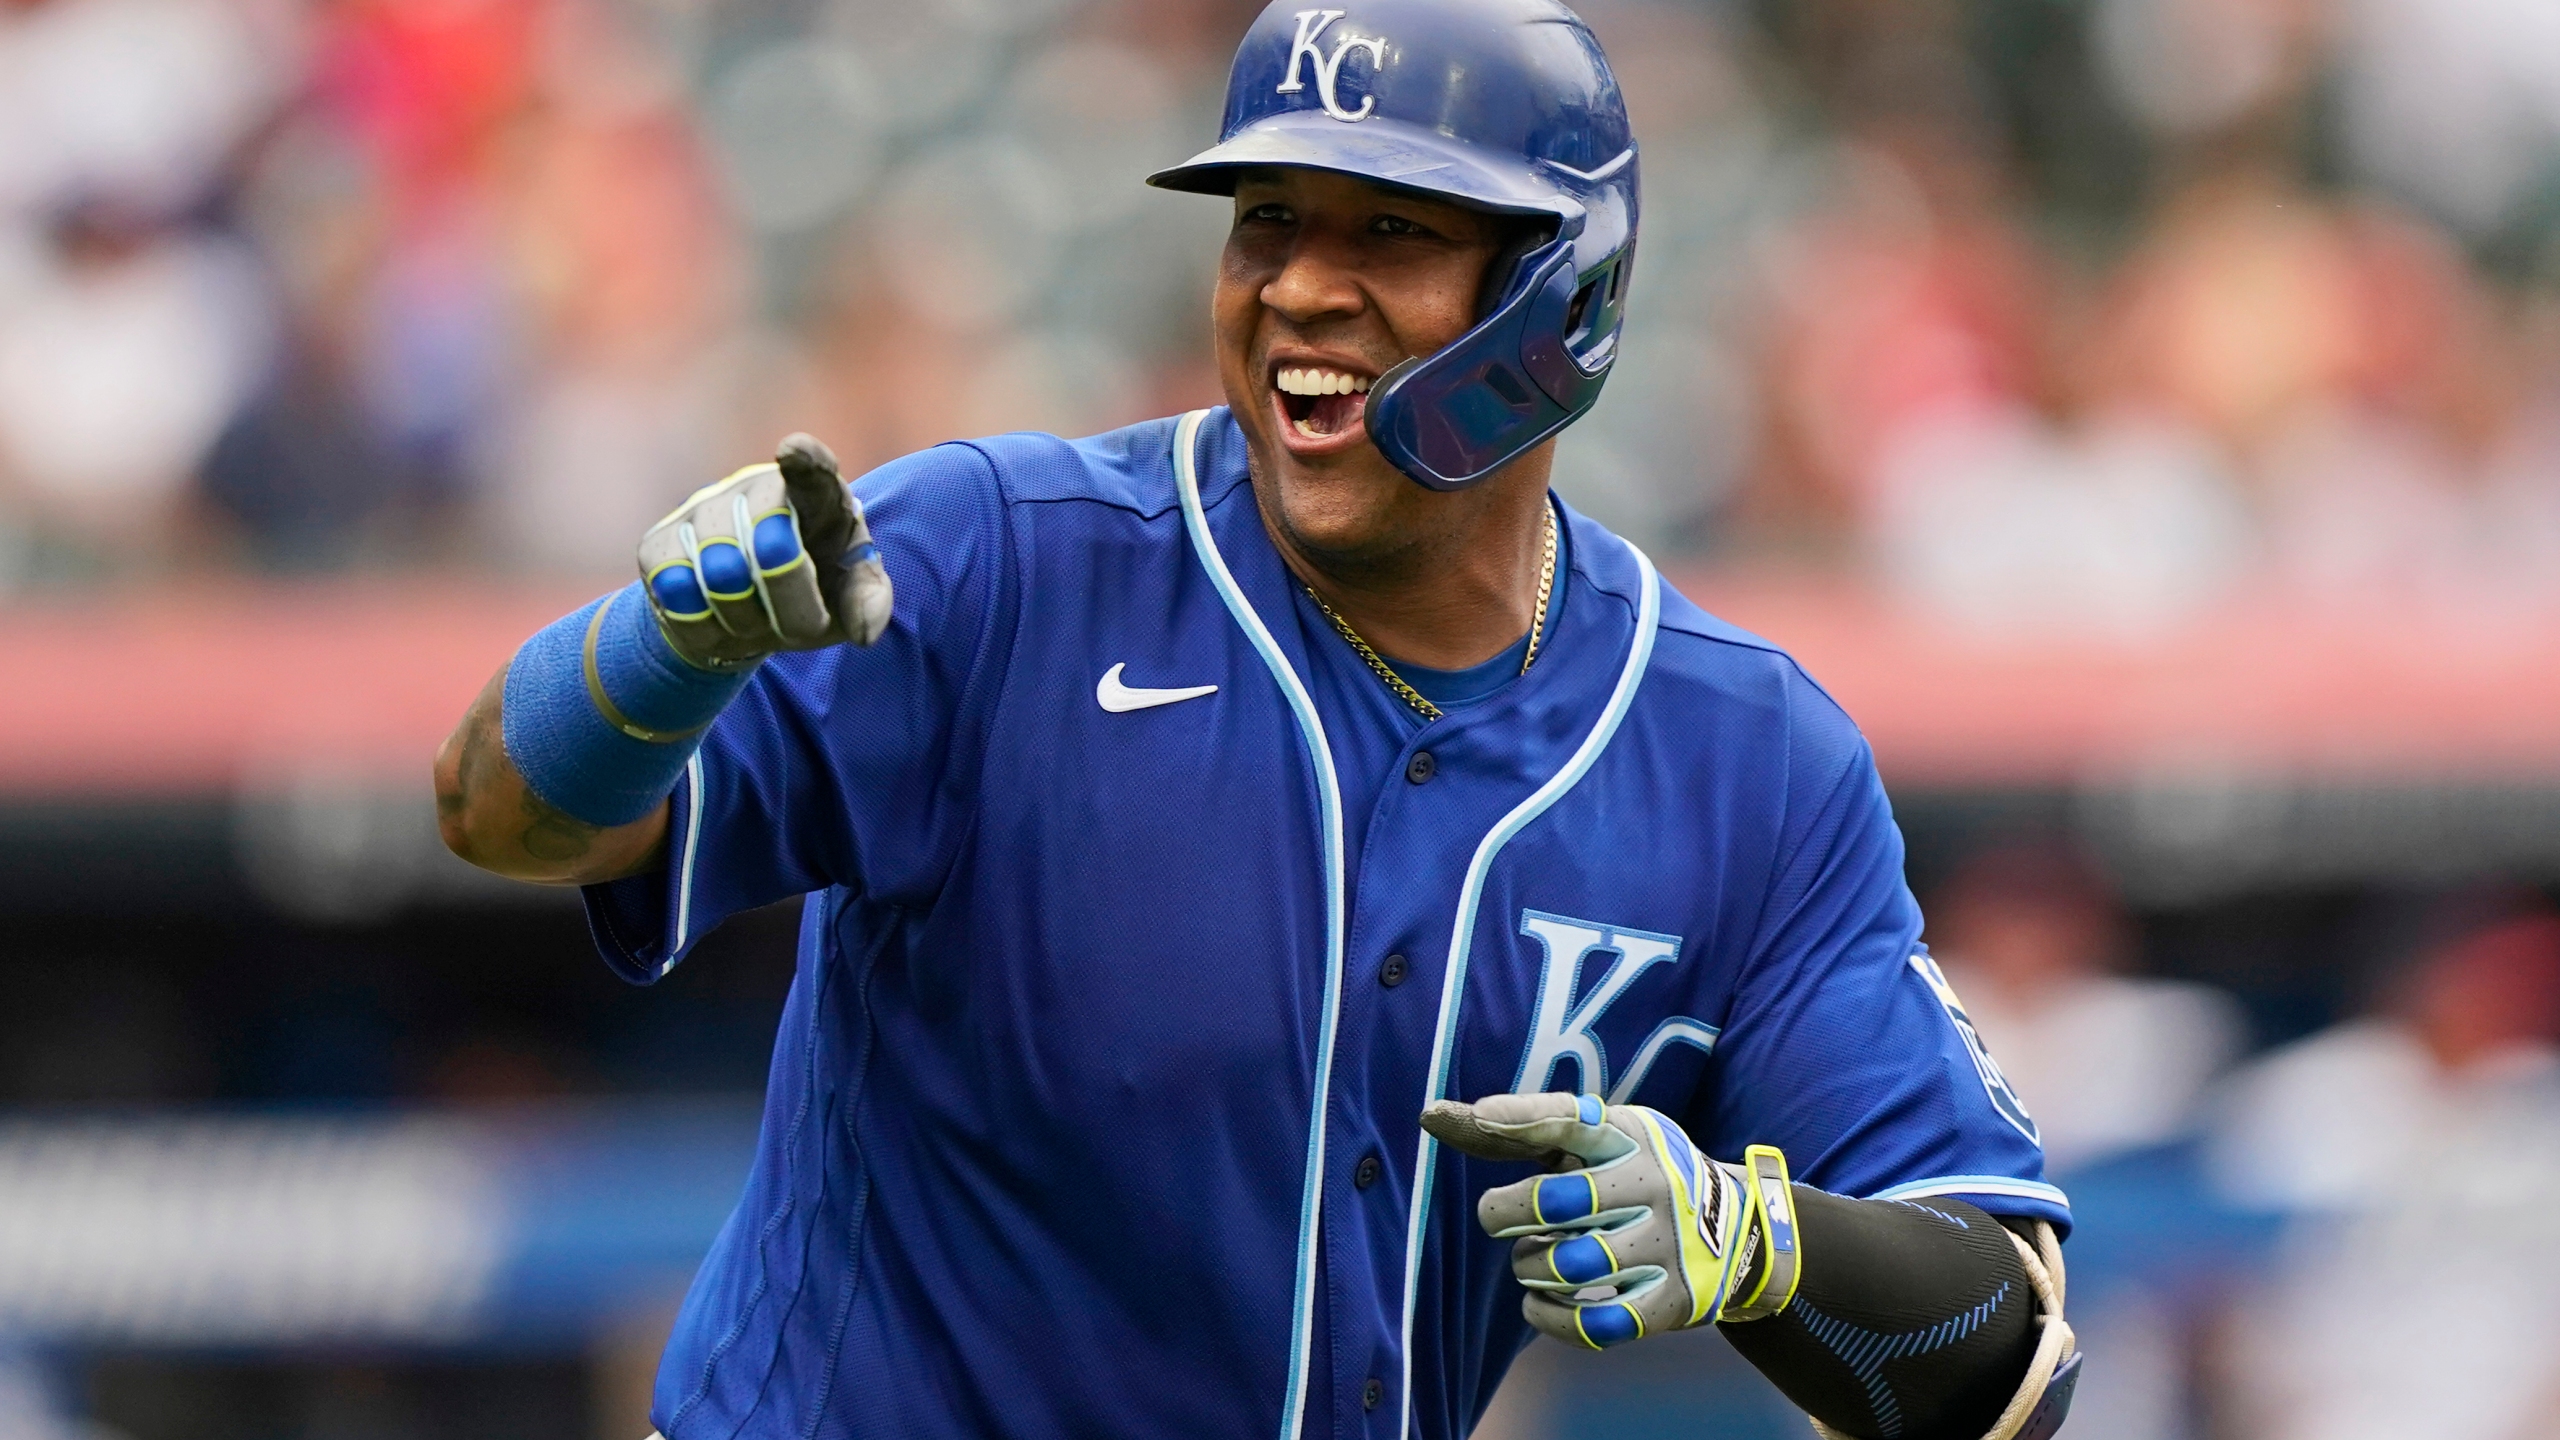 Salvador Perez finishes top of the league in home runs and RBI